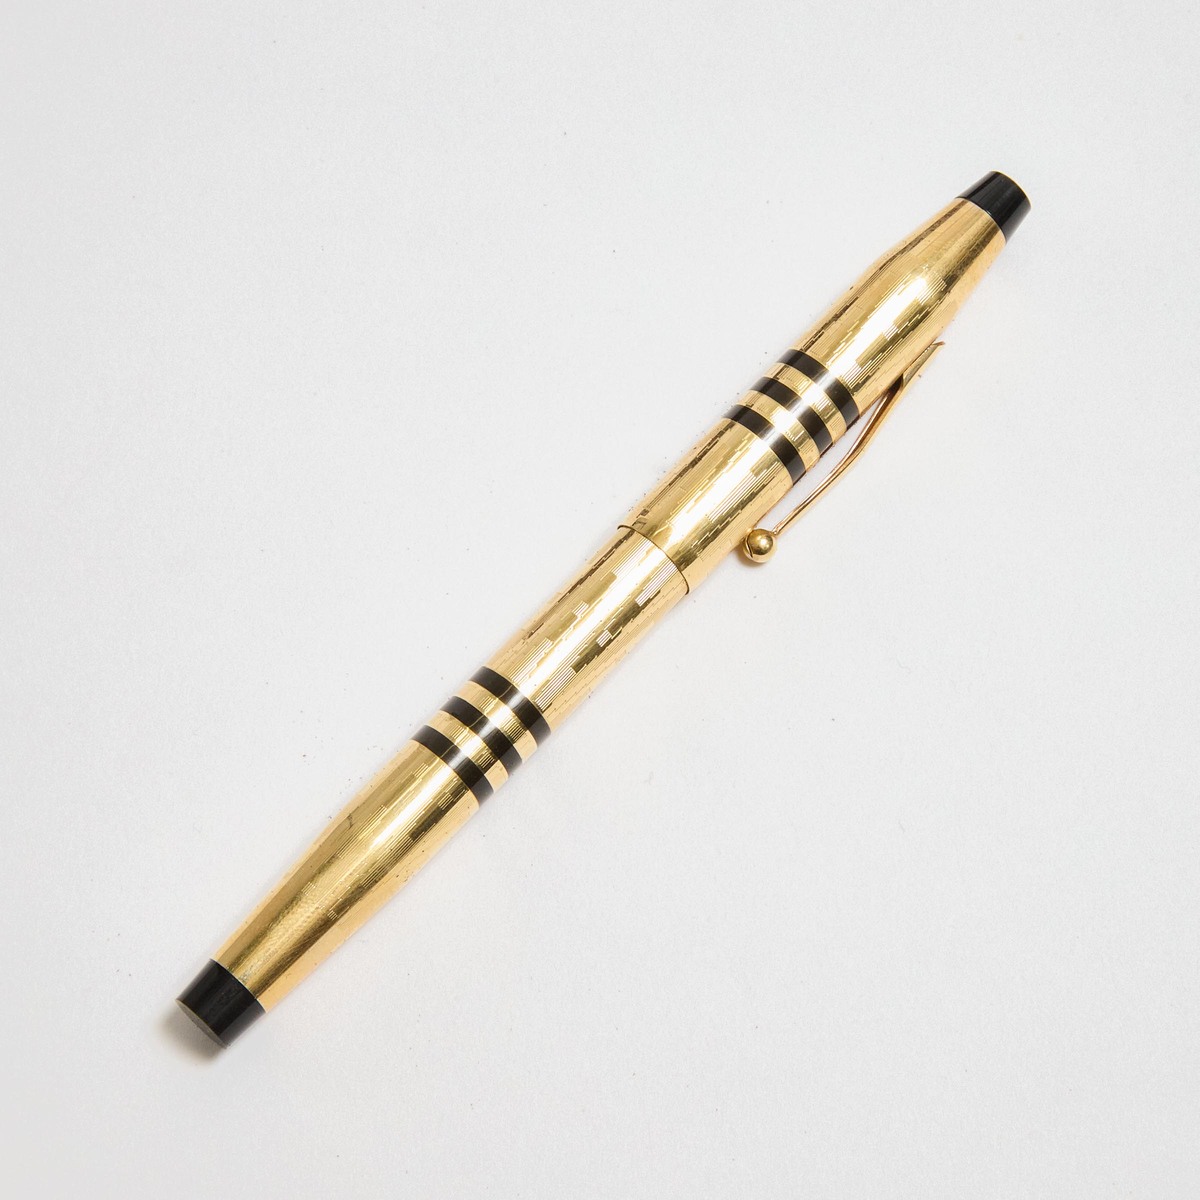 Cross 150th Anniversary Fountain Pen, #0881 of 2750; gold-plated and resin body with an 18k yellow g - Image 2 of 3